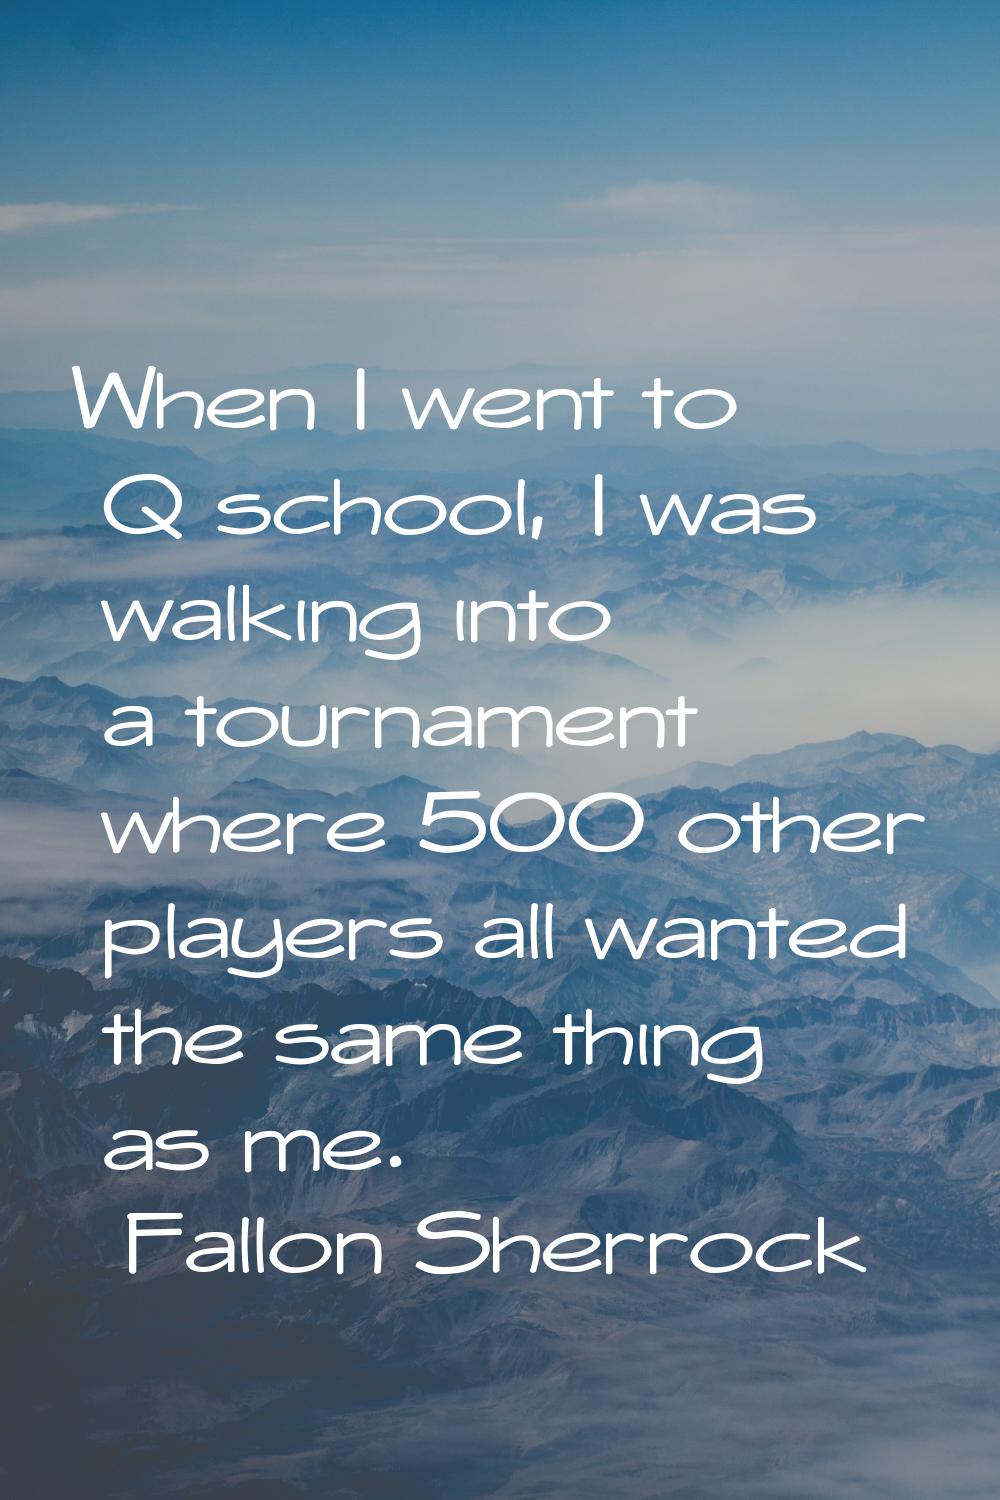 When I went to Q school, I was walking into a tournament where 500 other players all wanted the sam